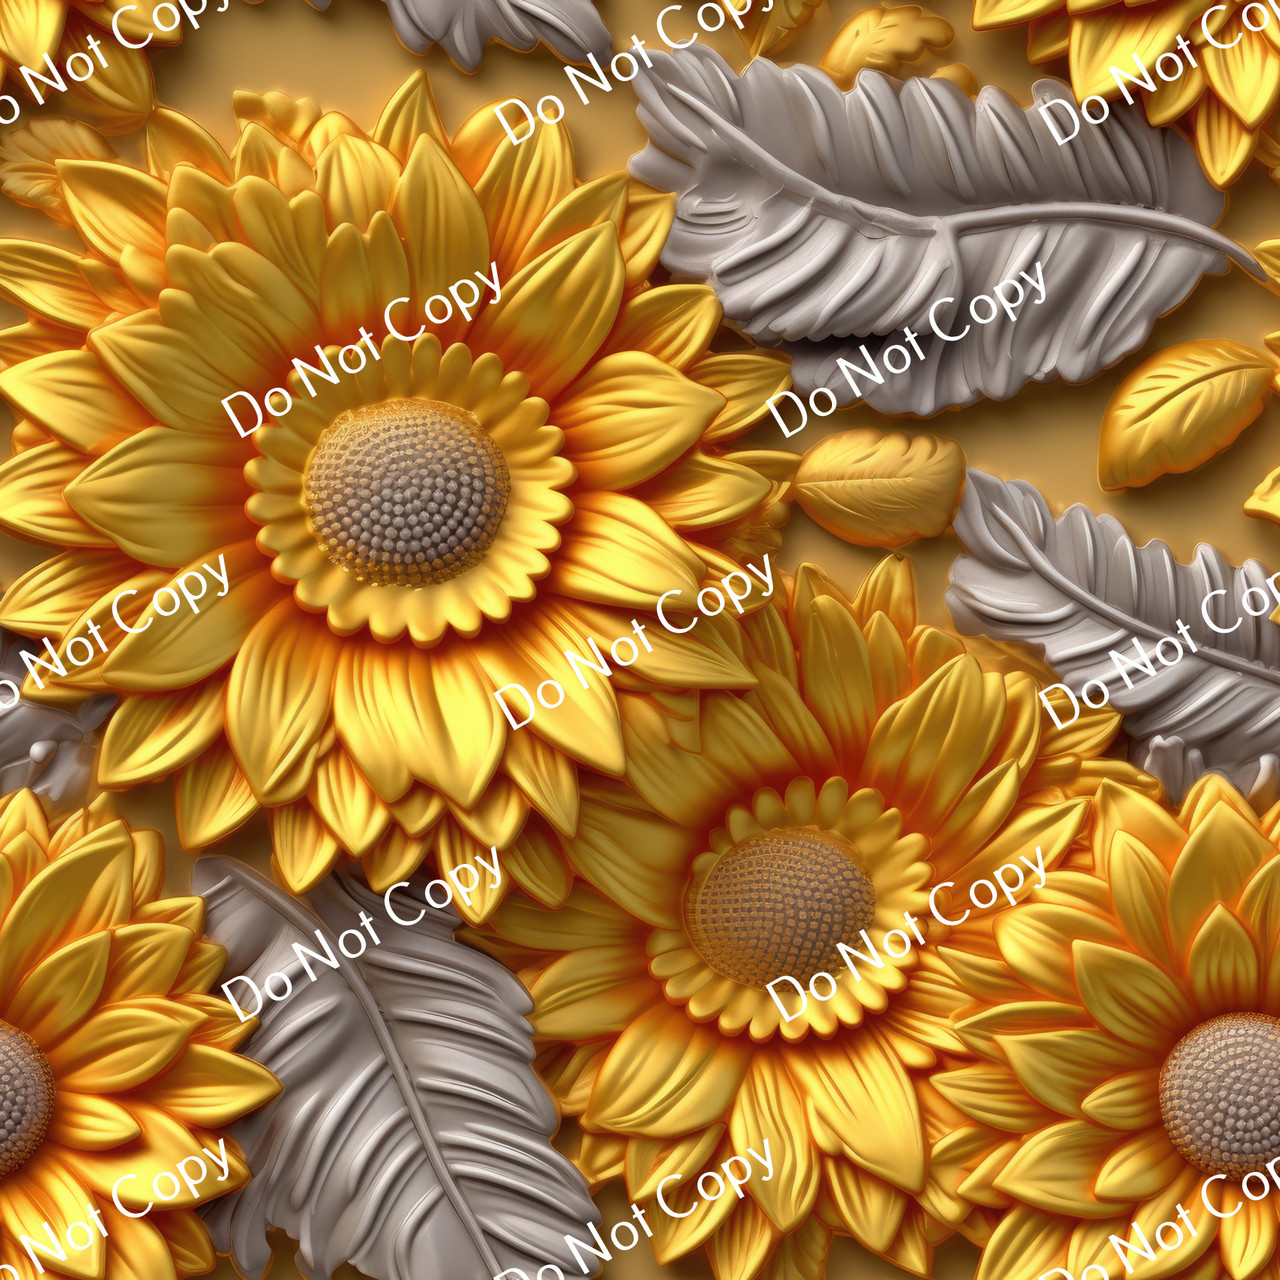 Tennessee Sports Logo Sunflower Ready to Press Sublimation